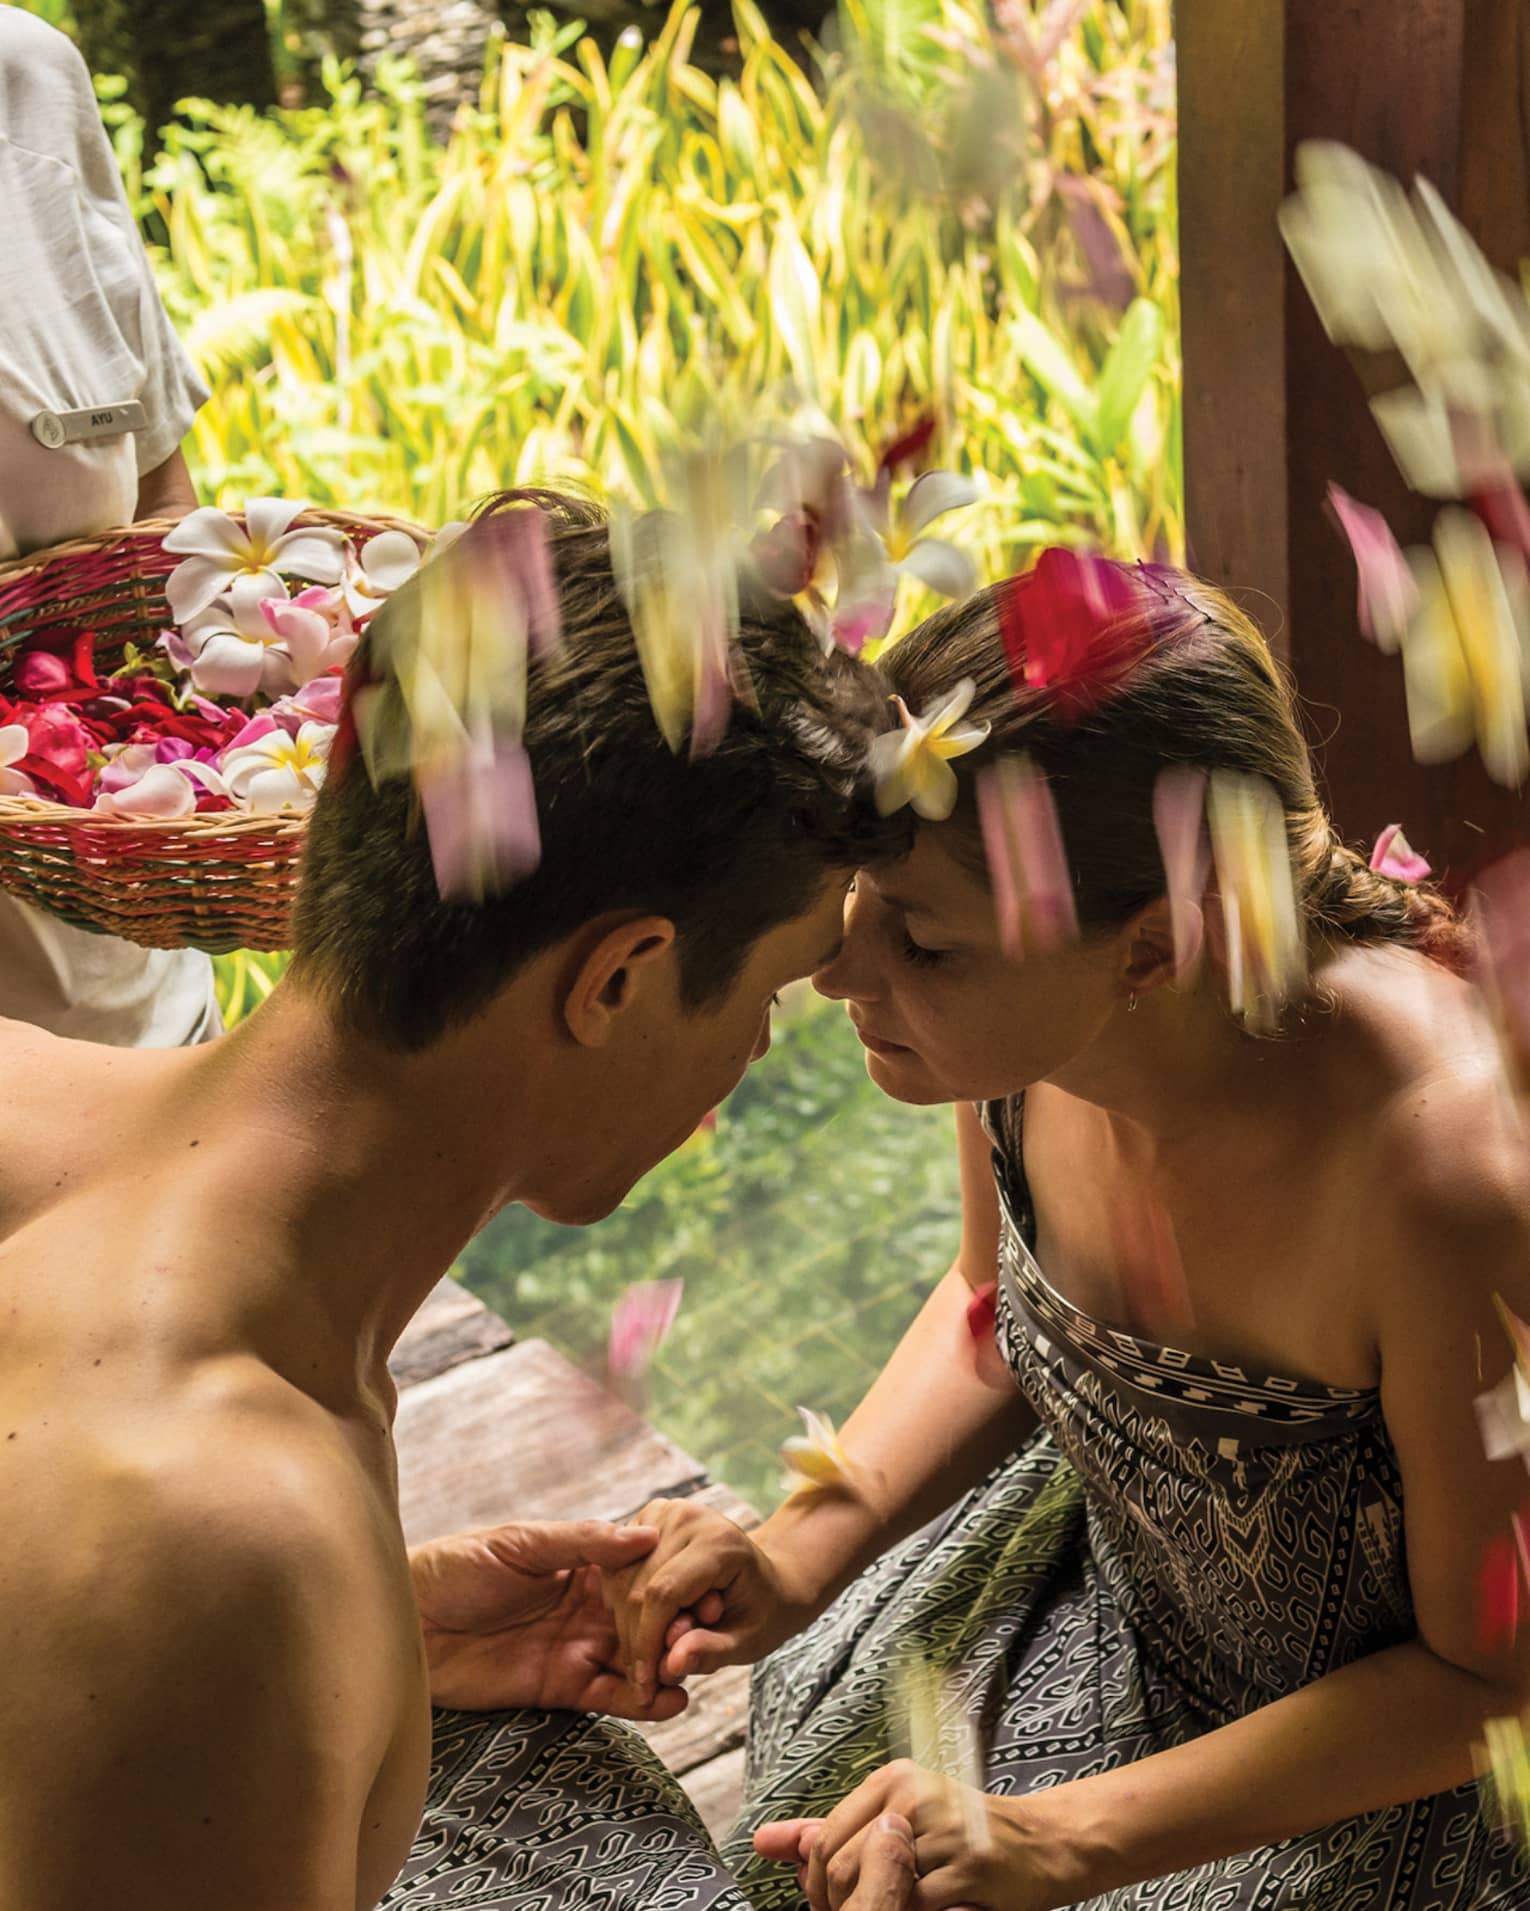 Couple on chairs, hold hands, foreheads together as woman sprinkles flower petals